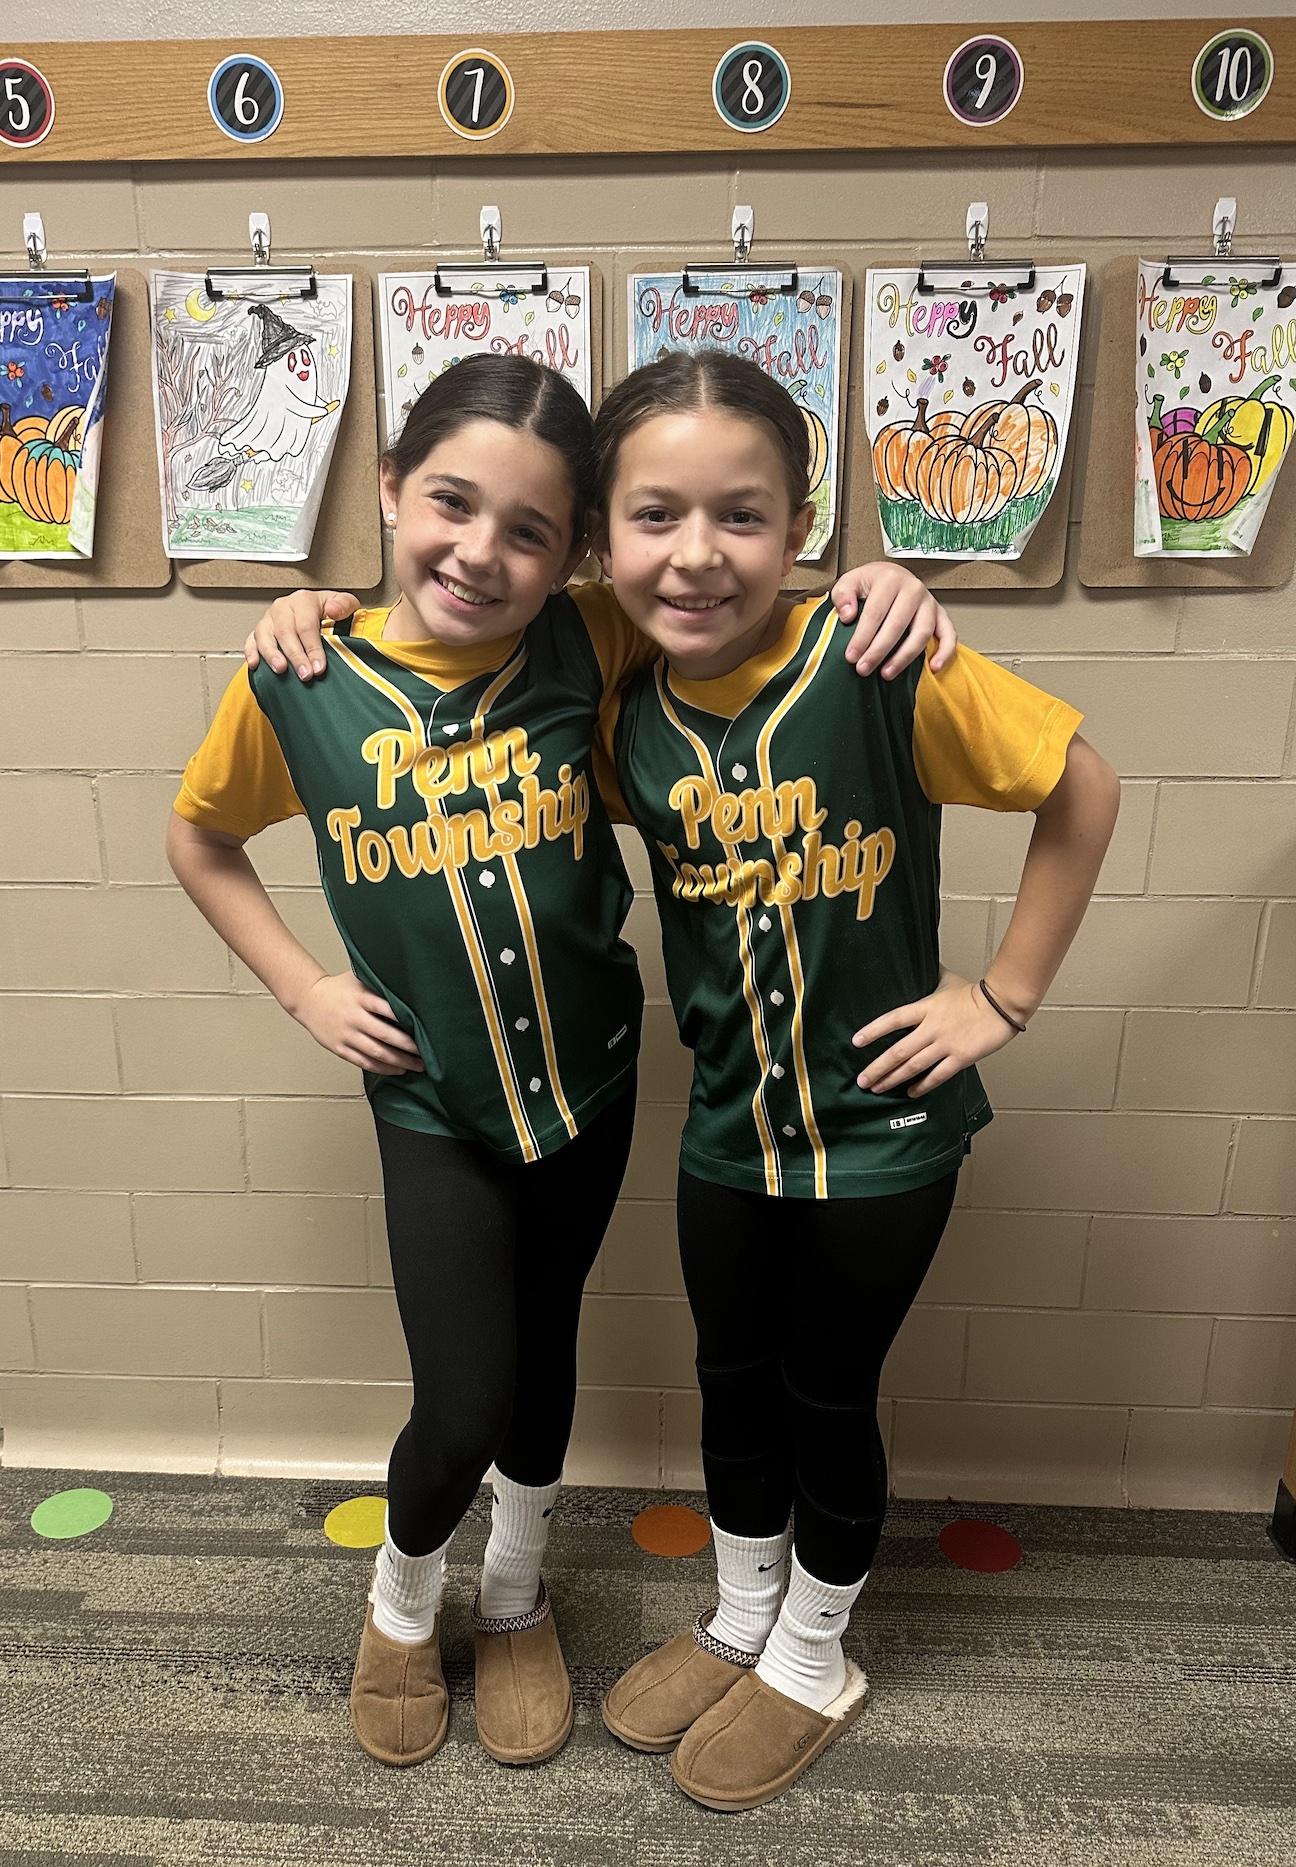 Ava McKillop and Sophia Braun dress as twins on Thursday’s “team up against drugs” day at Level Green Elementary